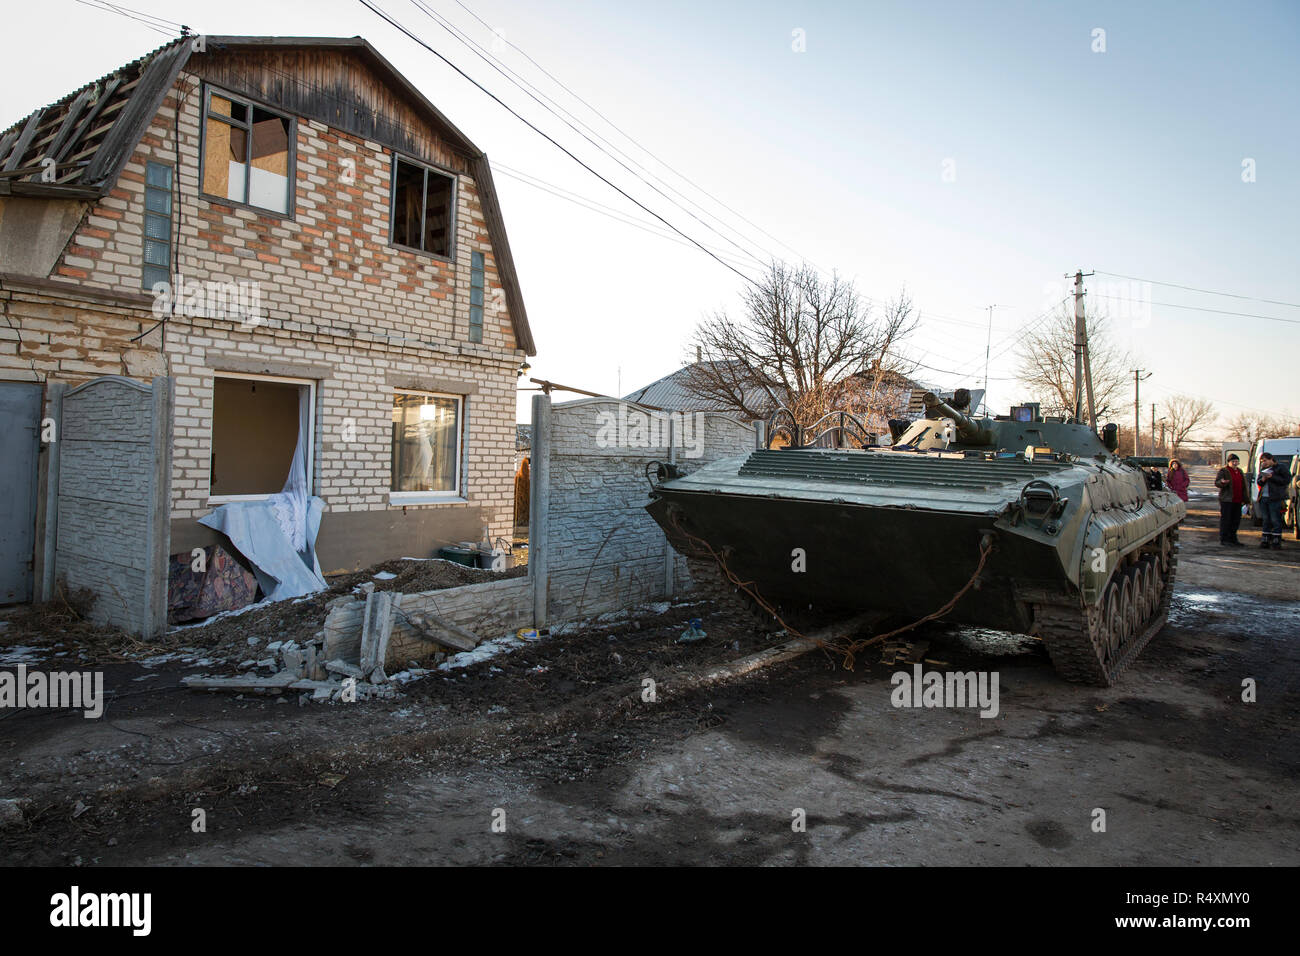 Destruction and chaos in Stanyzja-Luhanska on the front to the ATO zone, the separatist area of Eastern Ukraine. Stock Photo